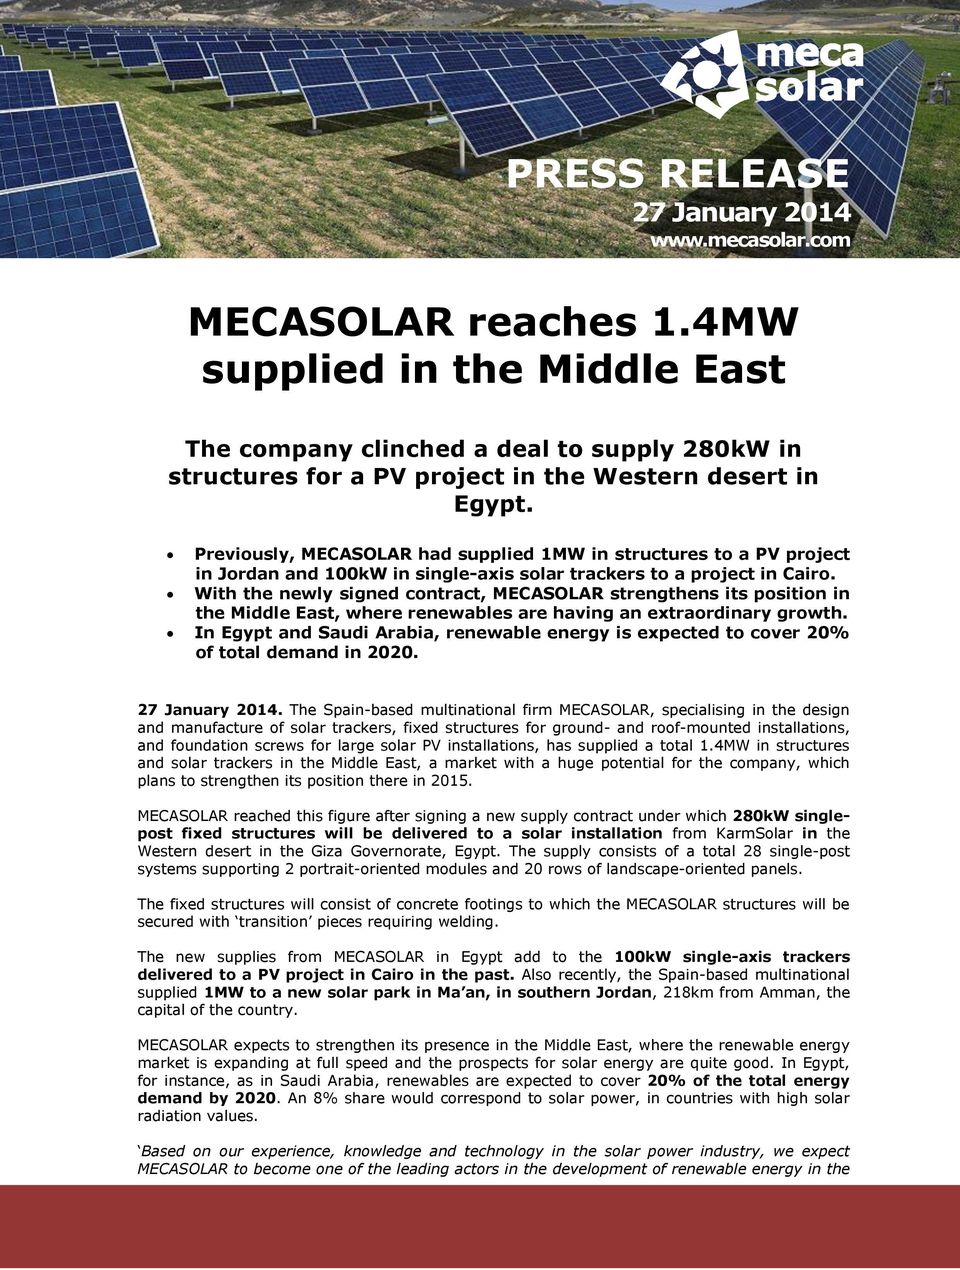 Previously, MECASOLAR had supplied 1MW in structures to a PV project in Jordan and 100kW in single-axis solar trackers to a project in Cairo.